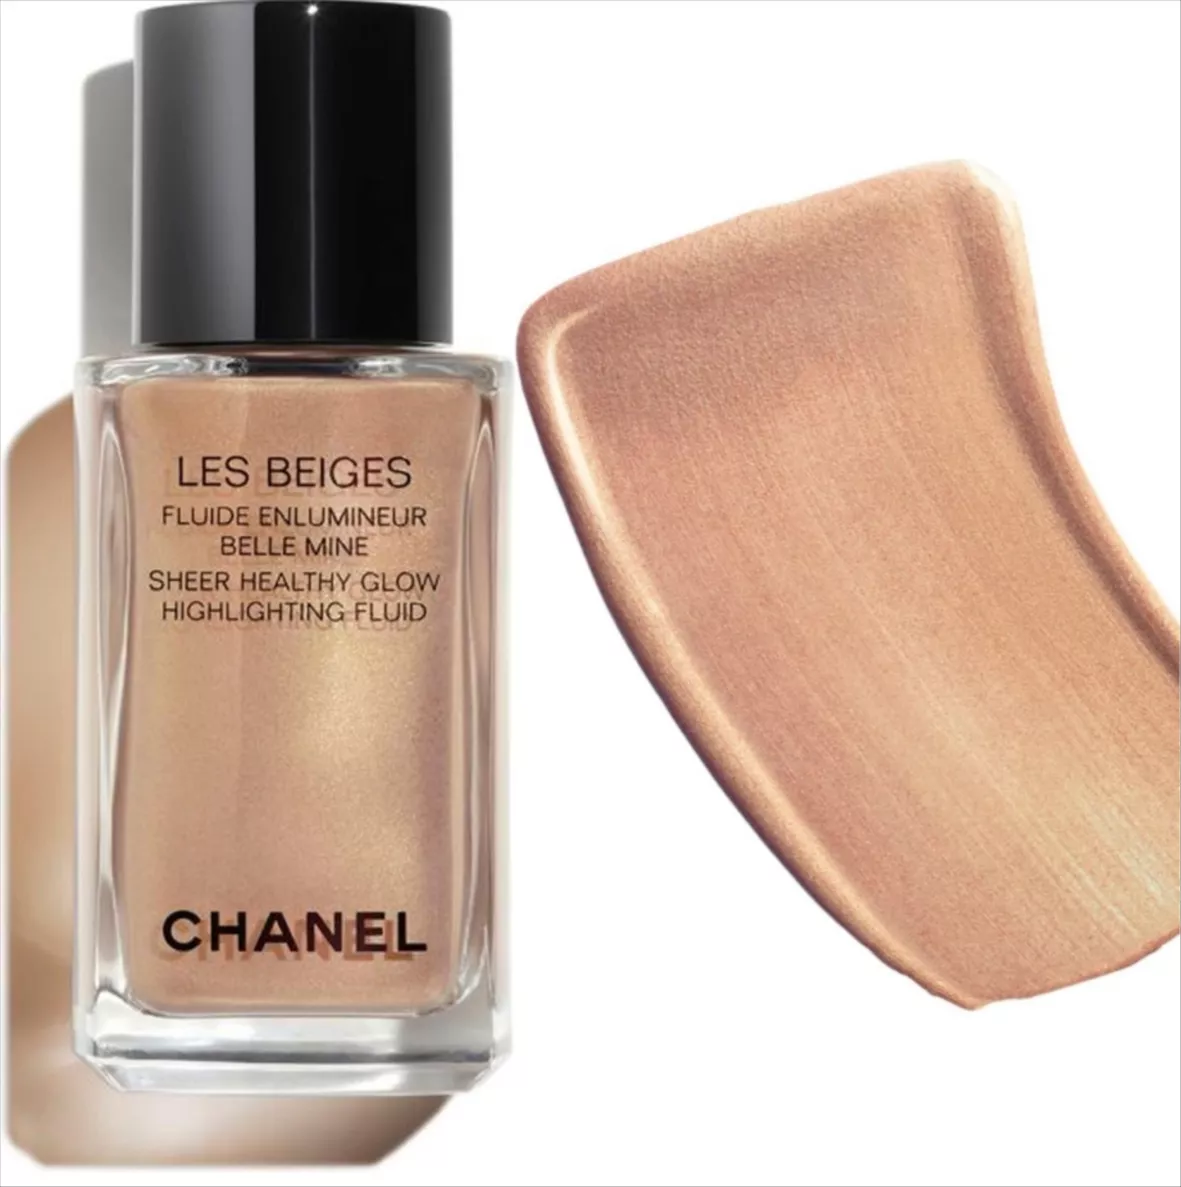 Chanel Sunkissed Sheer Healthy Glow Highlighting Fluid Review & Swatches